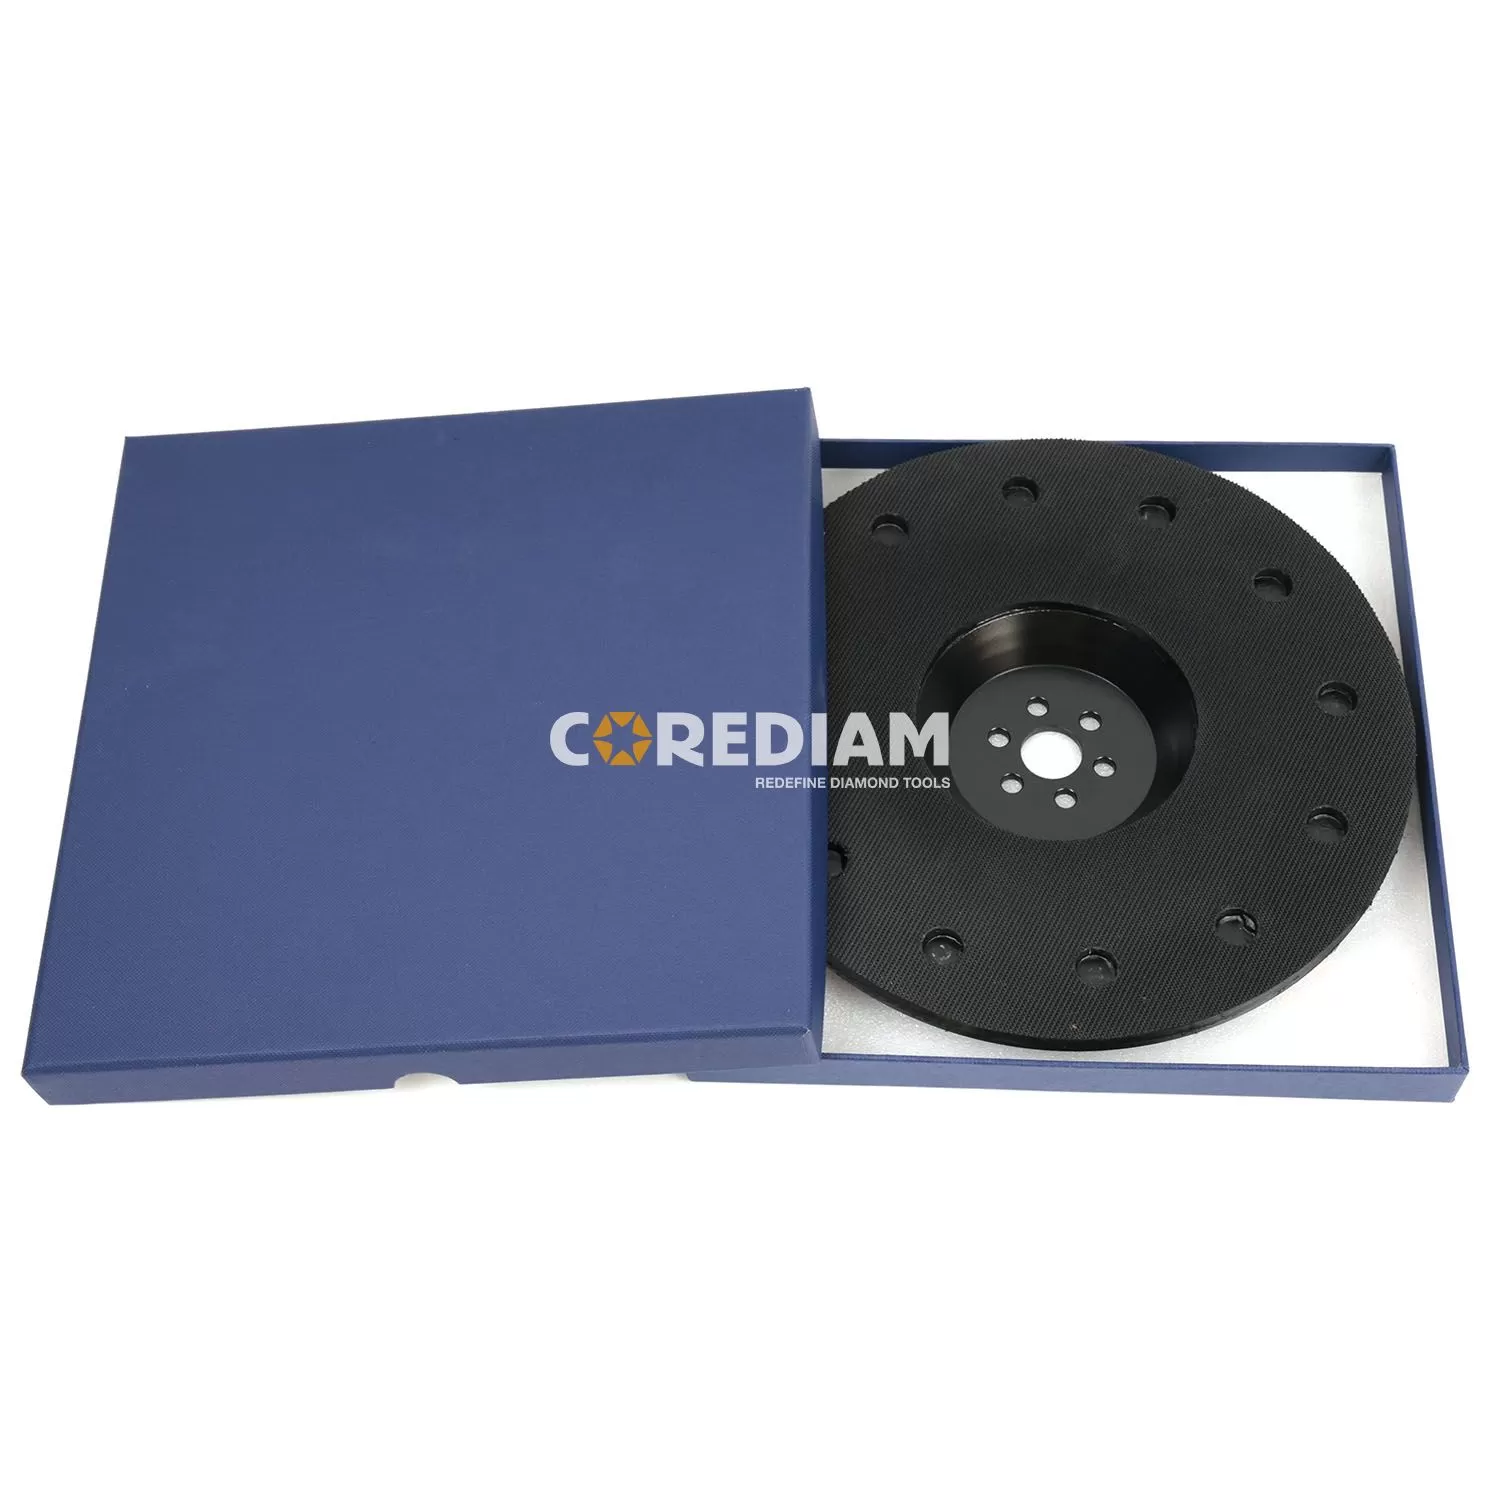 250mm Adapter Plate for disc